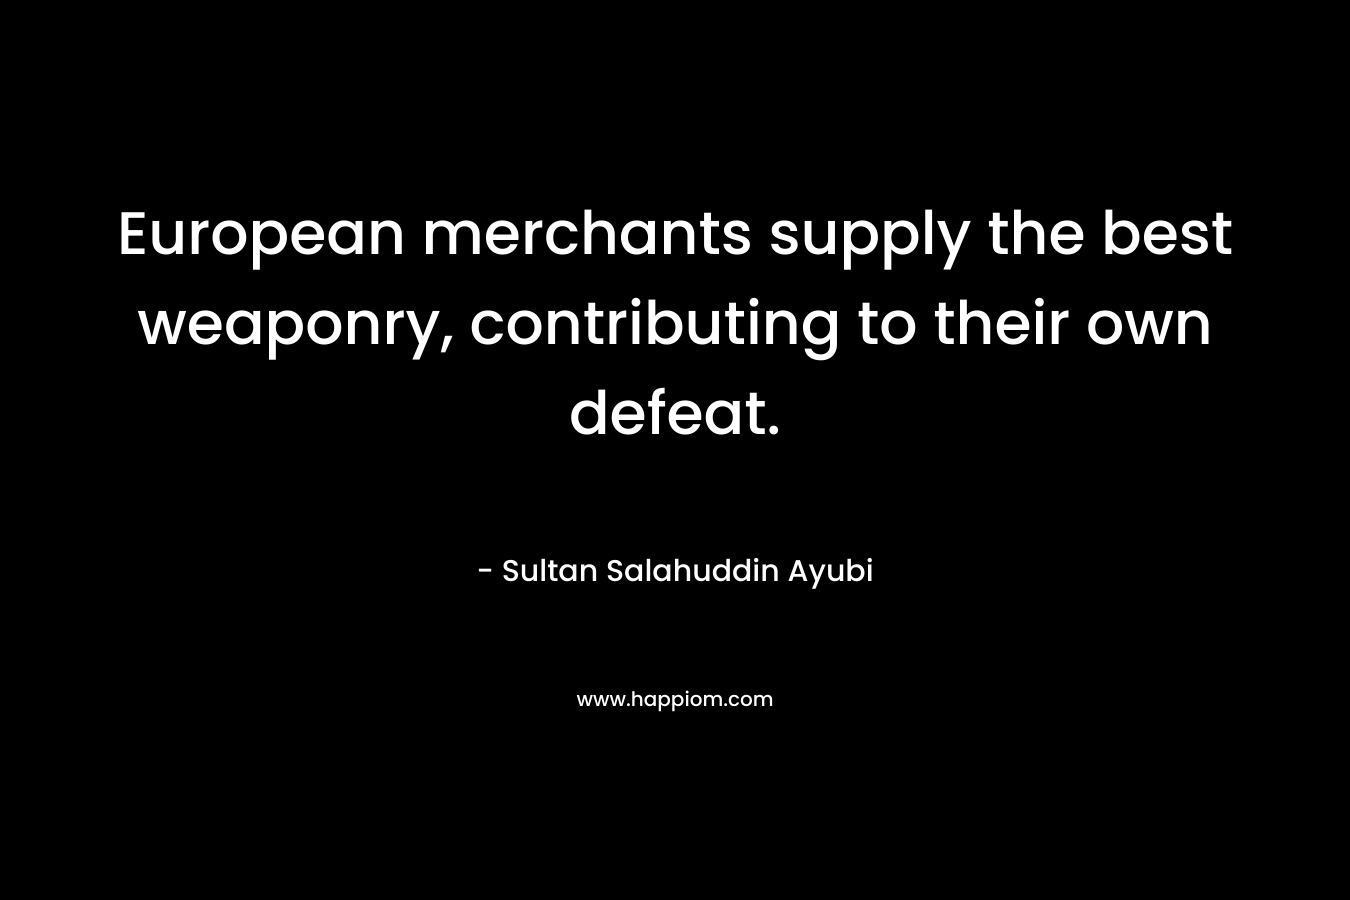 European merchants supply the best weaponry, contributing to their own defeat.